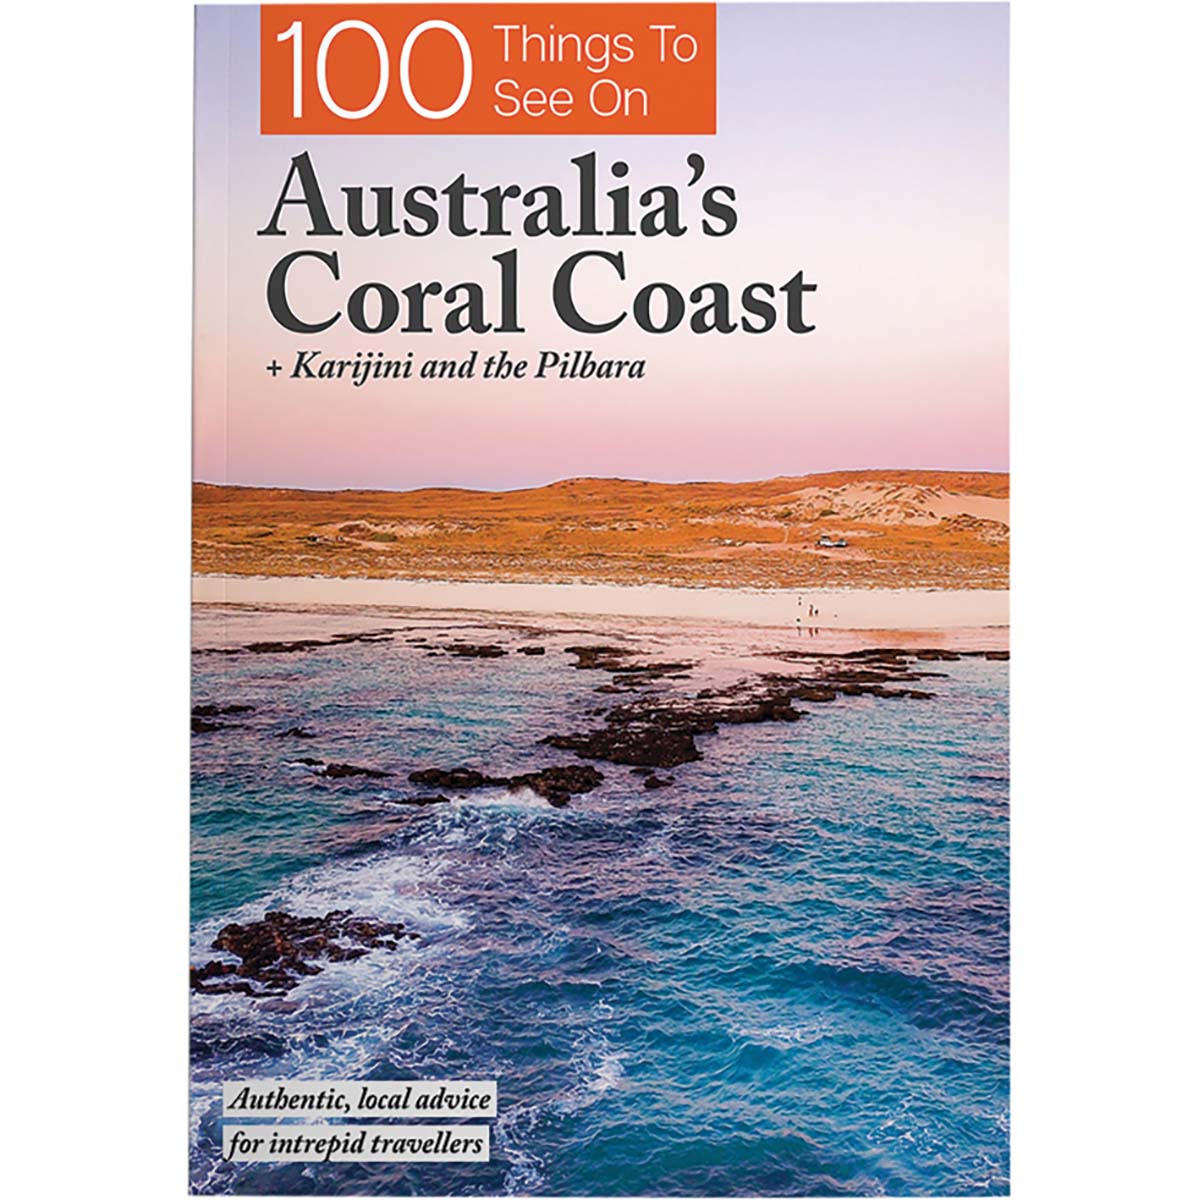 100 Things to See on Australia